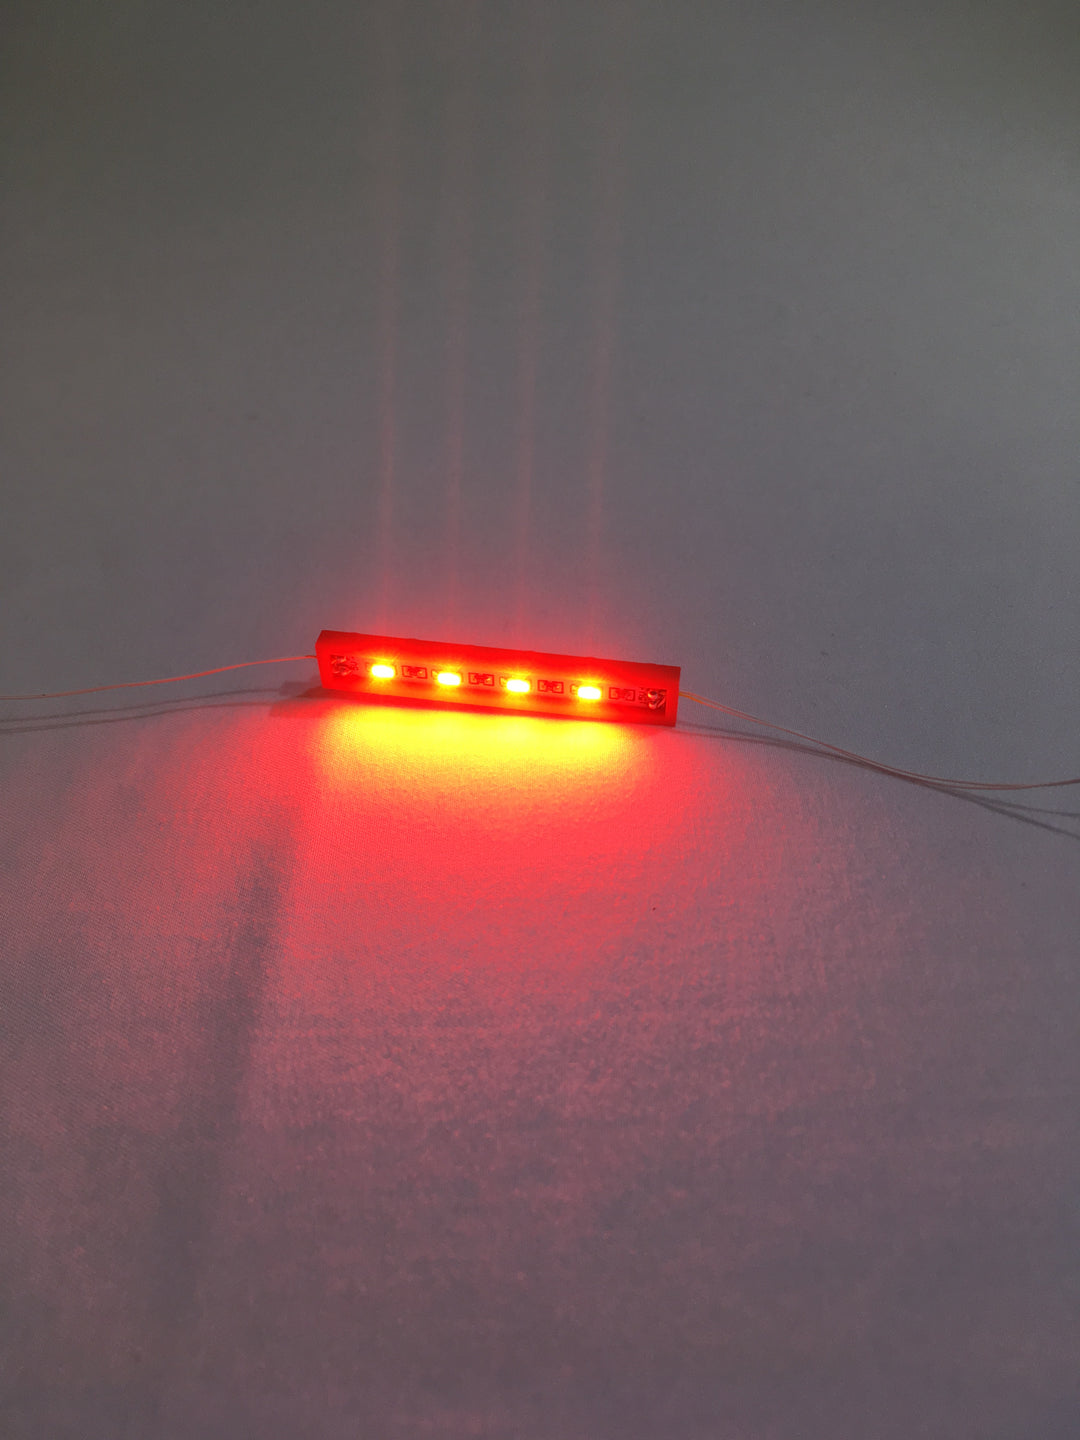 1x6-Red-Solid-Plate-LED-LIGHT-LINX-Create-Your-Own-LED-String-works-with-LEGO-bricks-by-Brick-Loot